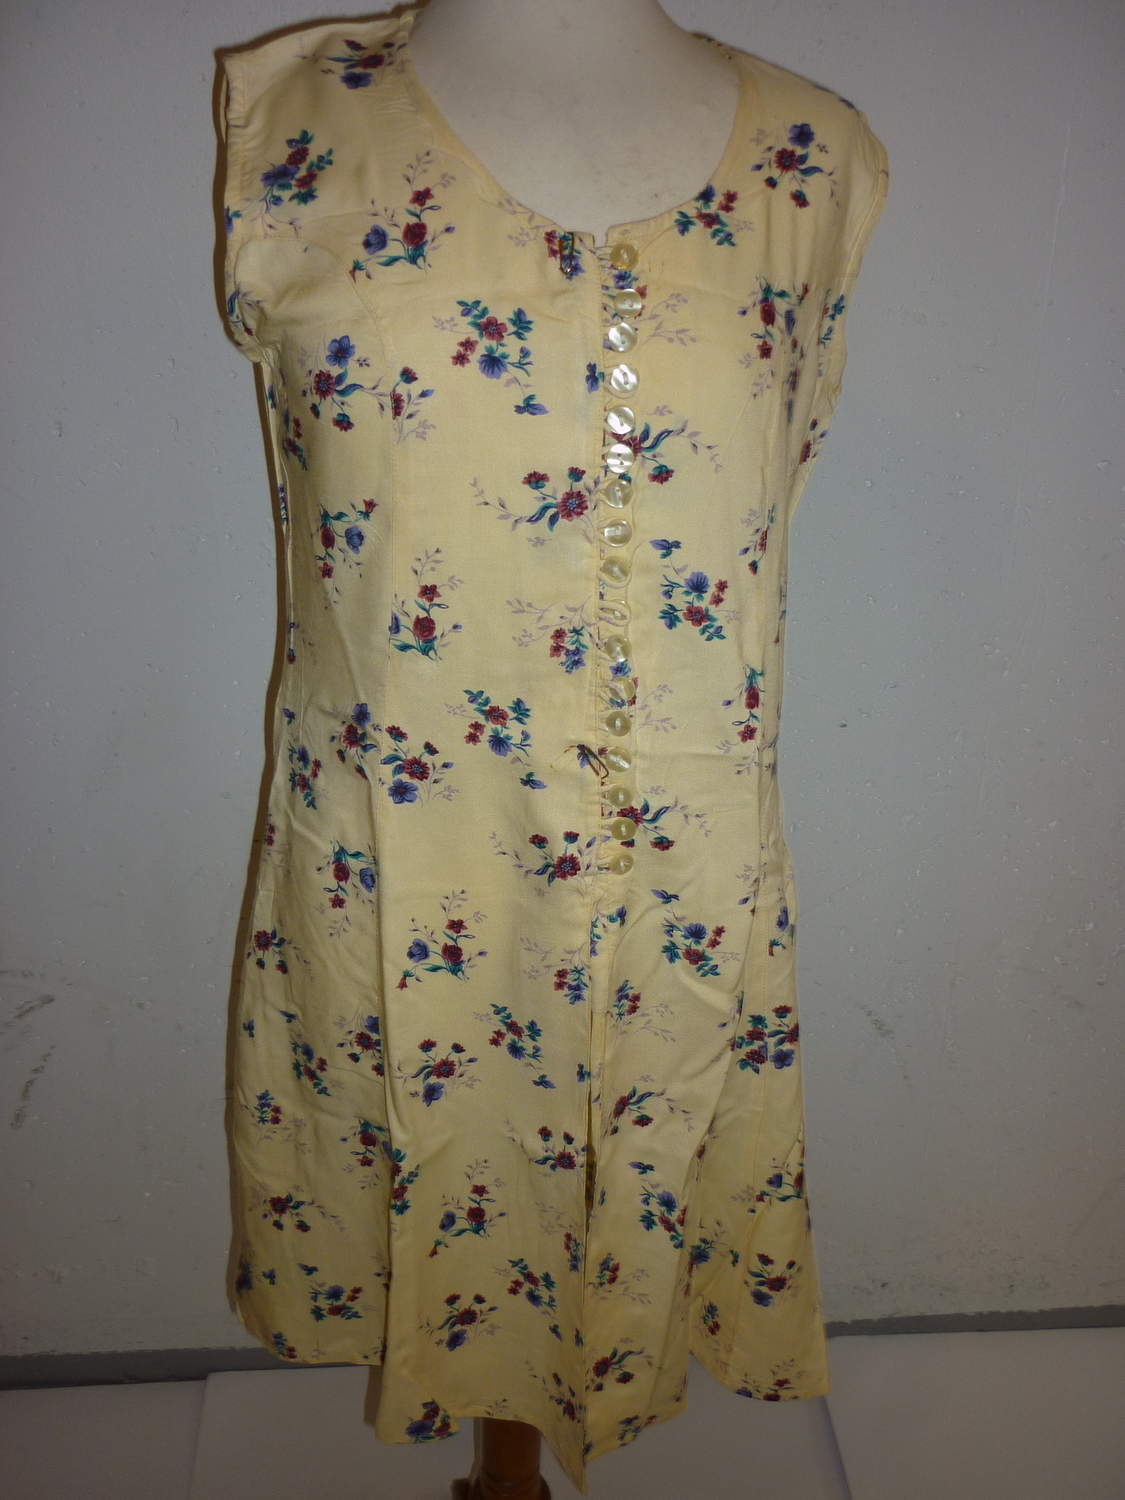 INDIAN BEAUTIFUL DRESS FOR LADIES-CHEAPEST PRICE GAURANTEE-50% DISCOUNT.ART NO.17/49788289